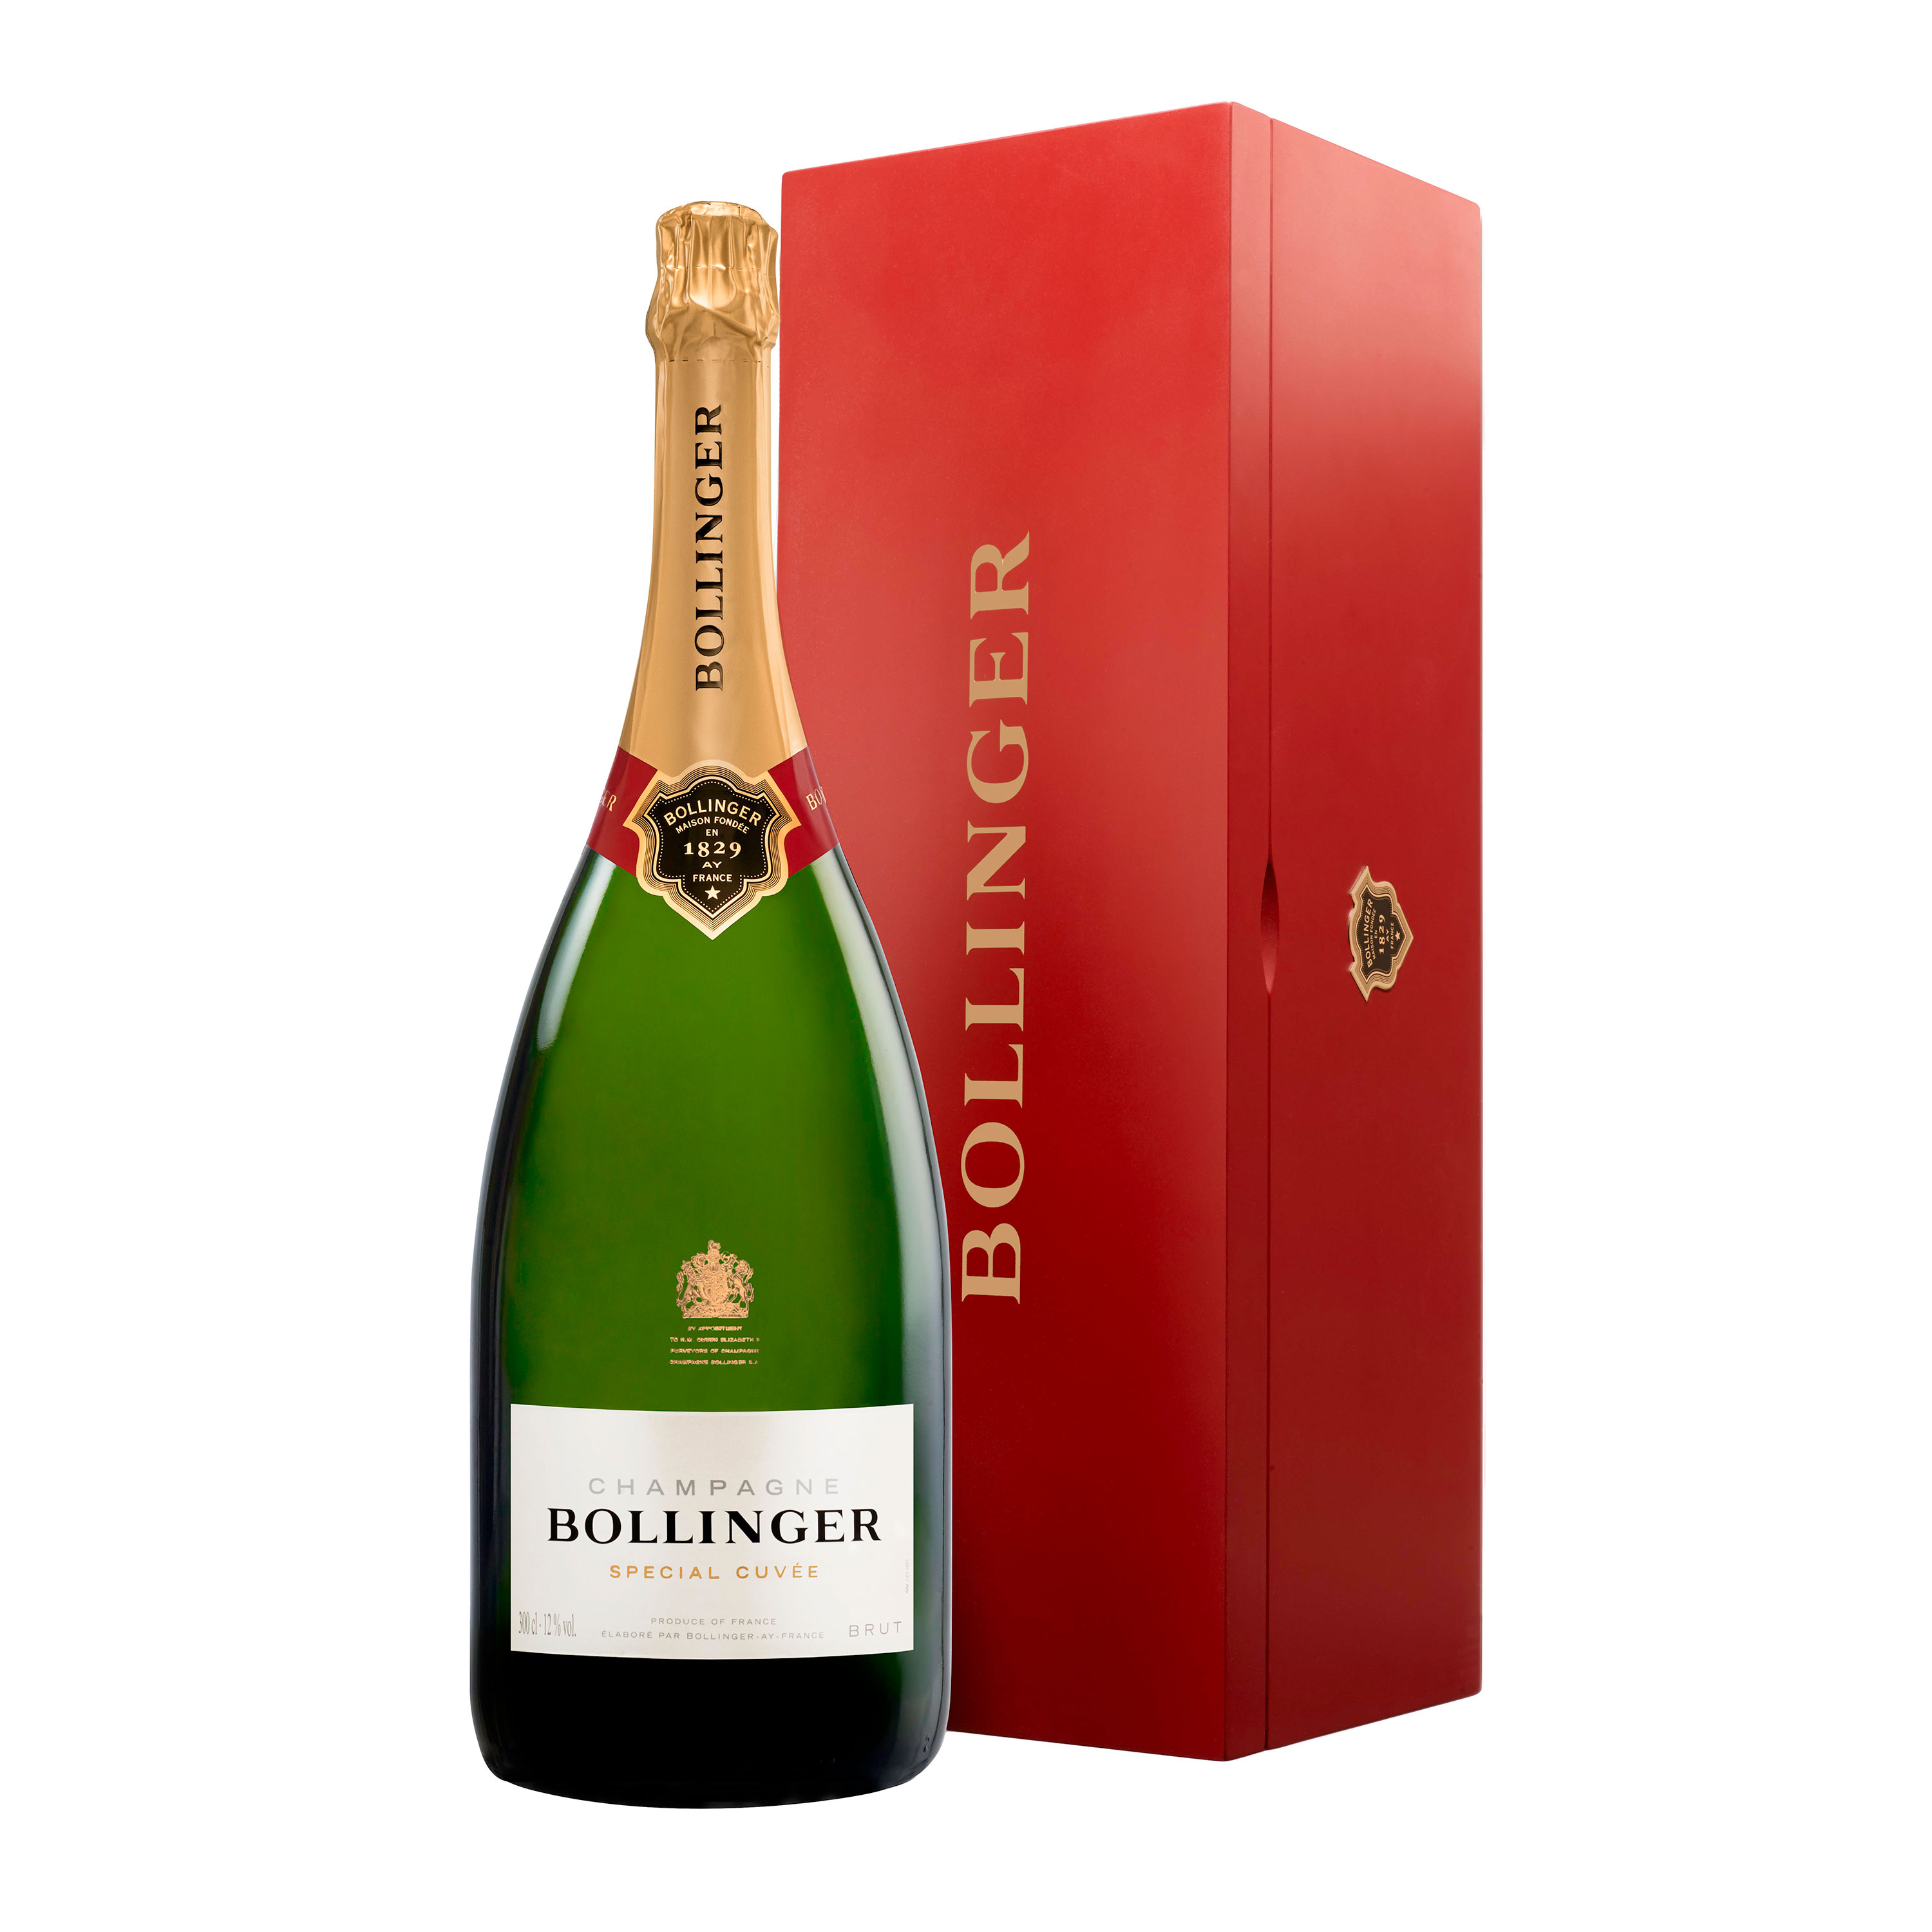 Jeroboam of Bollinger Special Cuvee Champagne